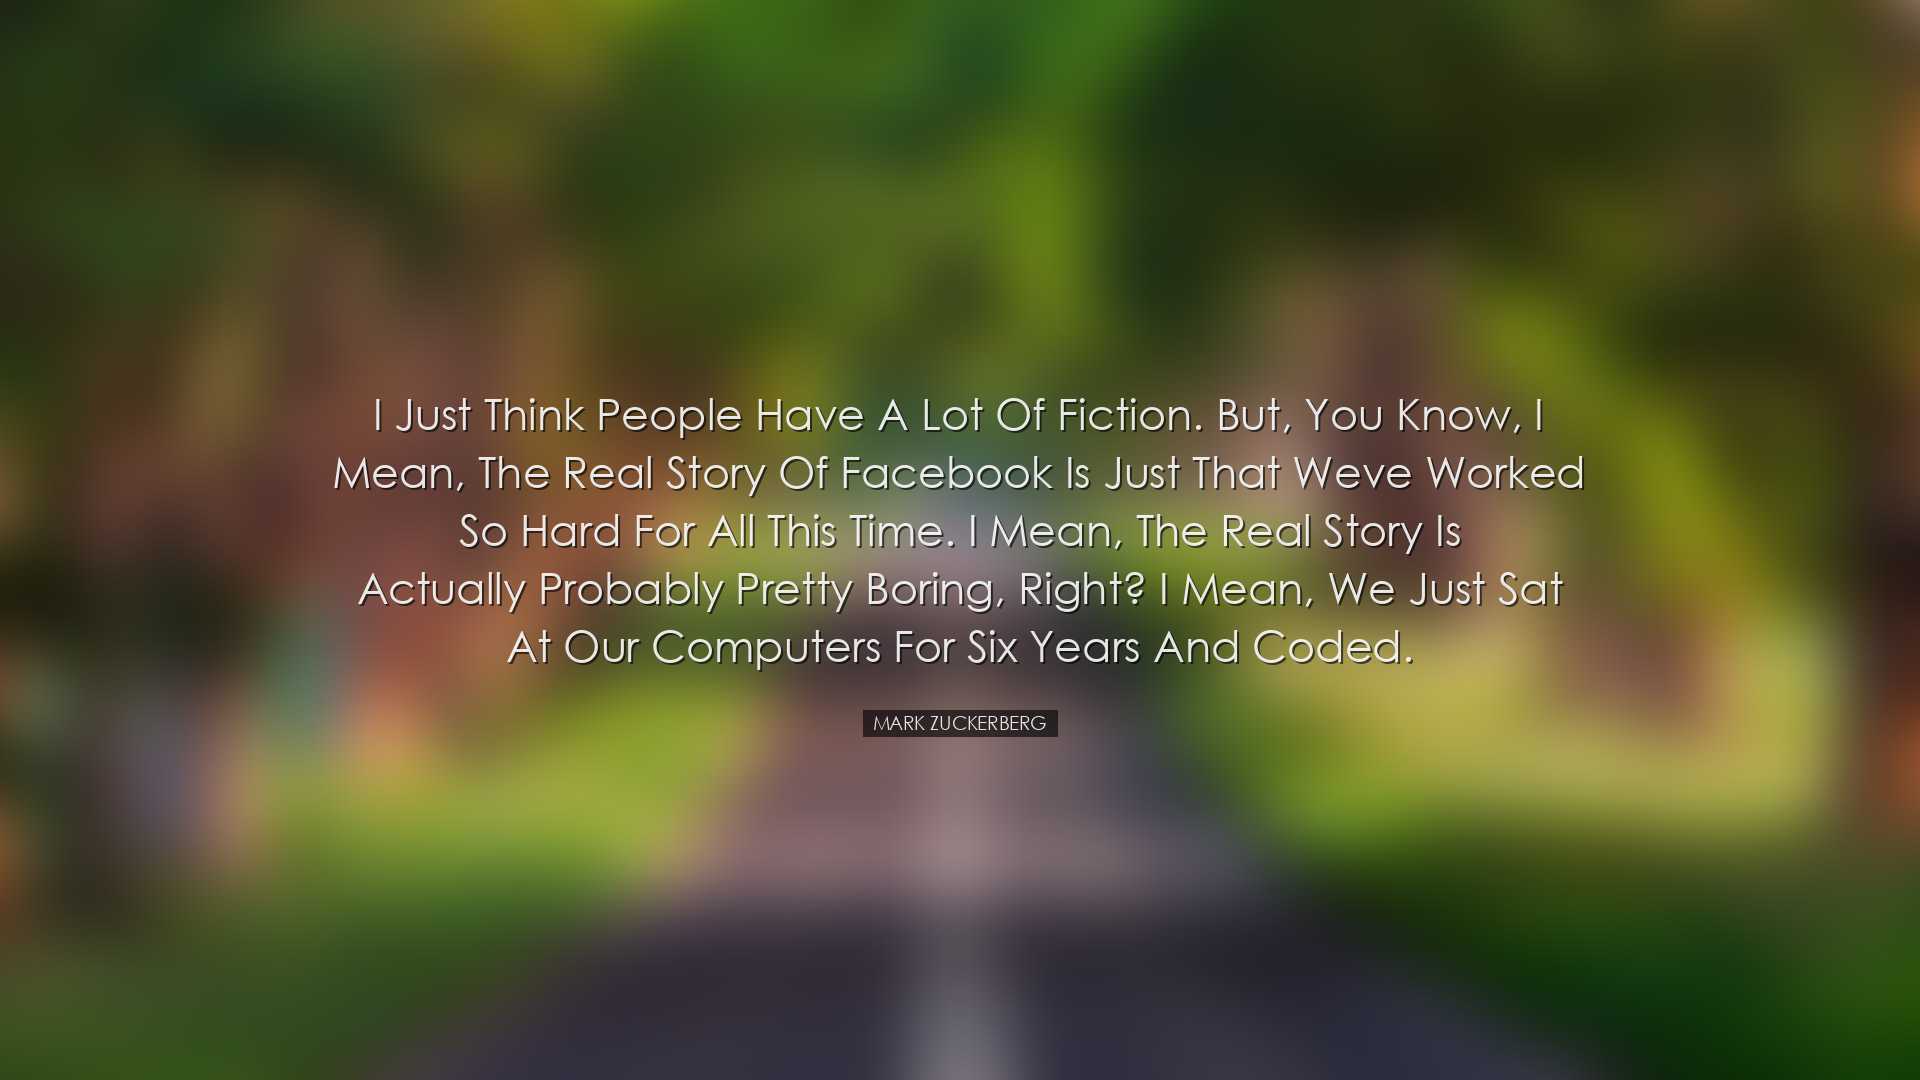 I just think people have a lot of fiction. But, you know, I mean,